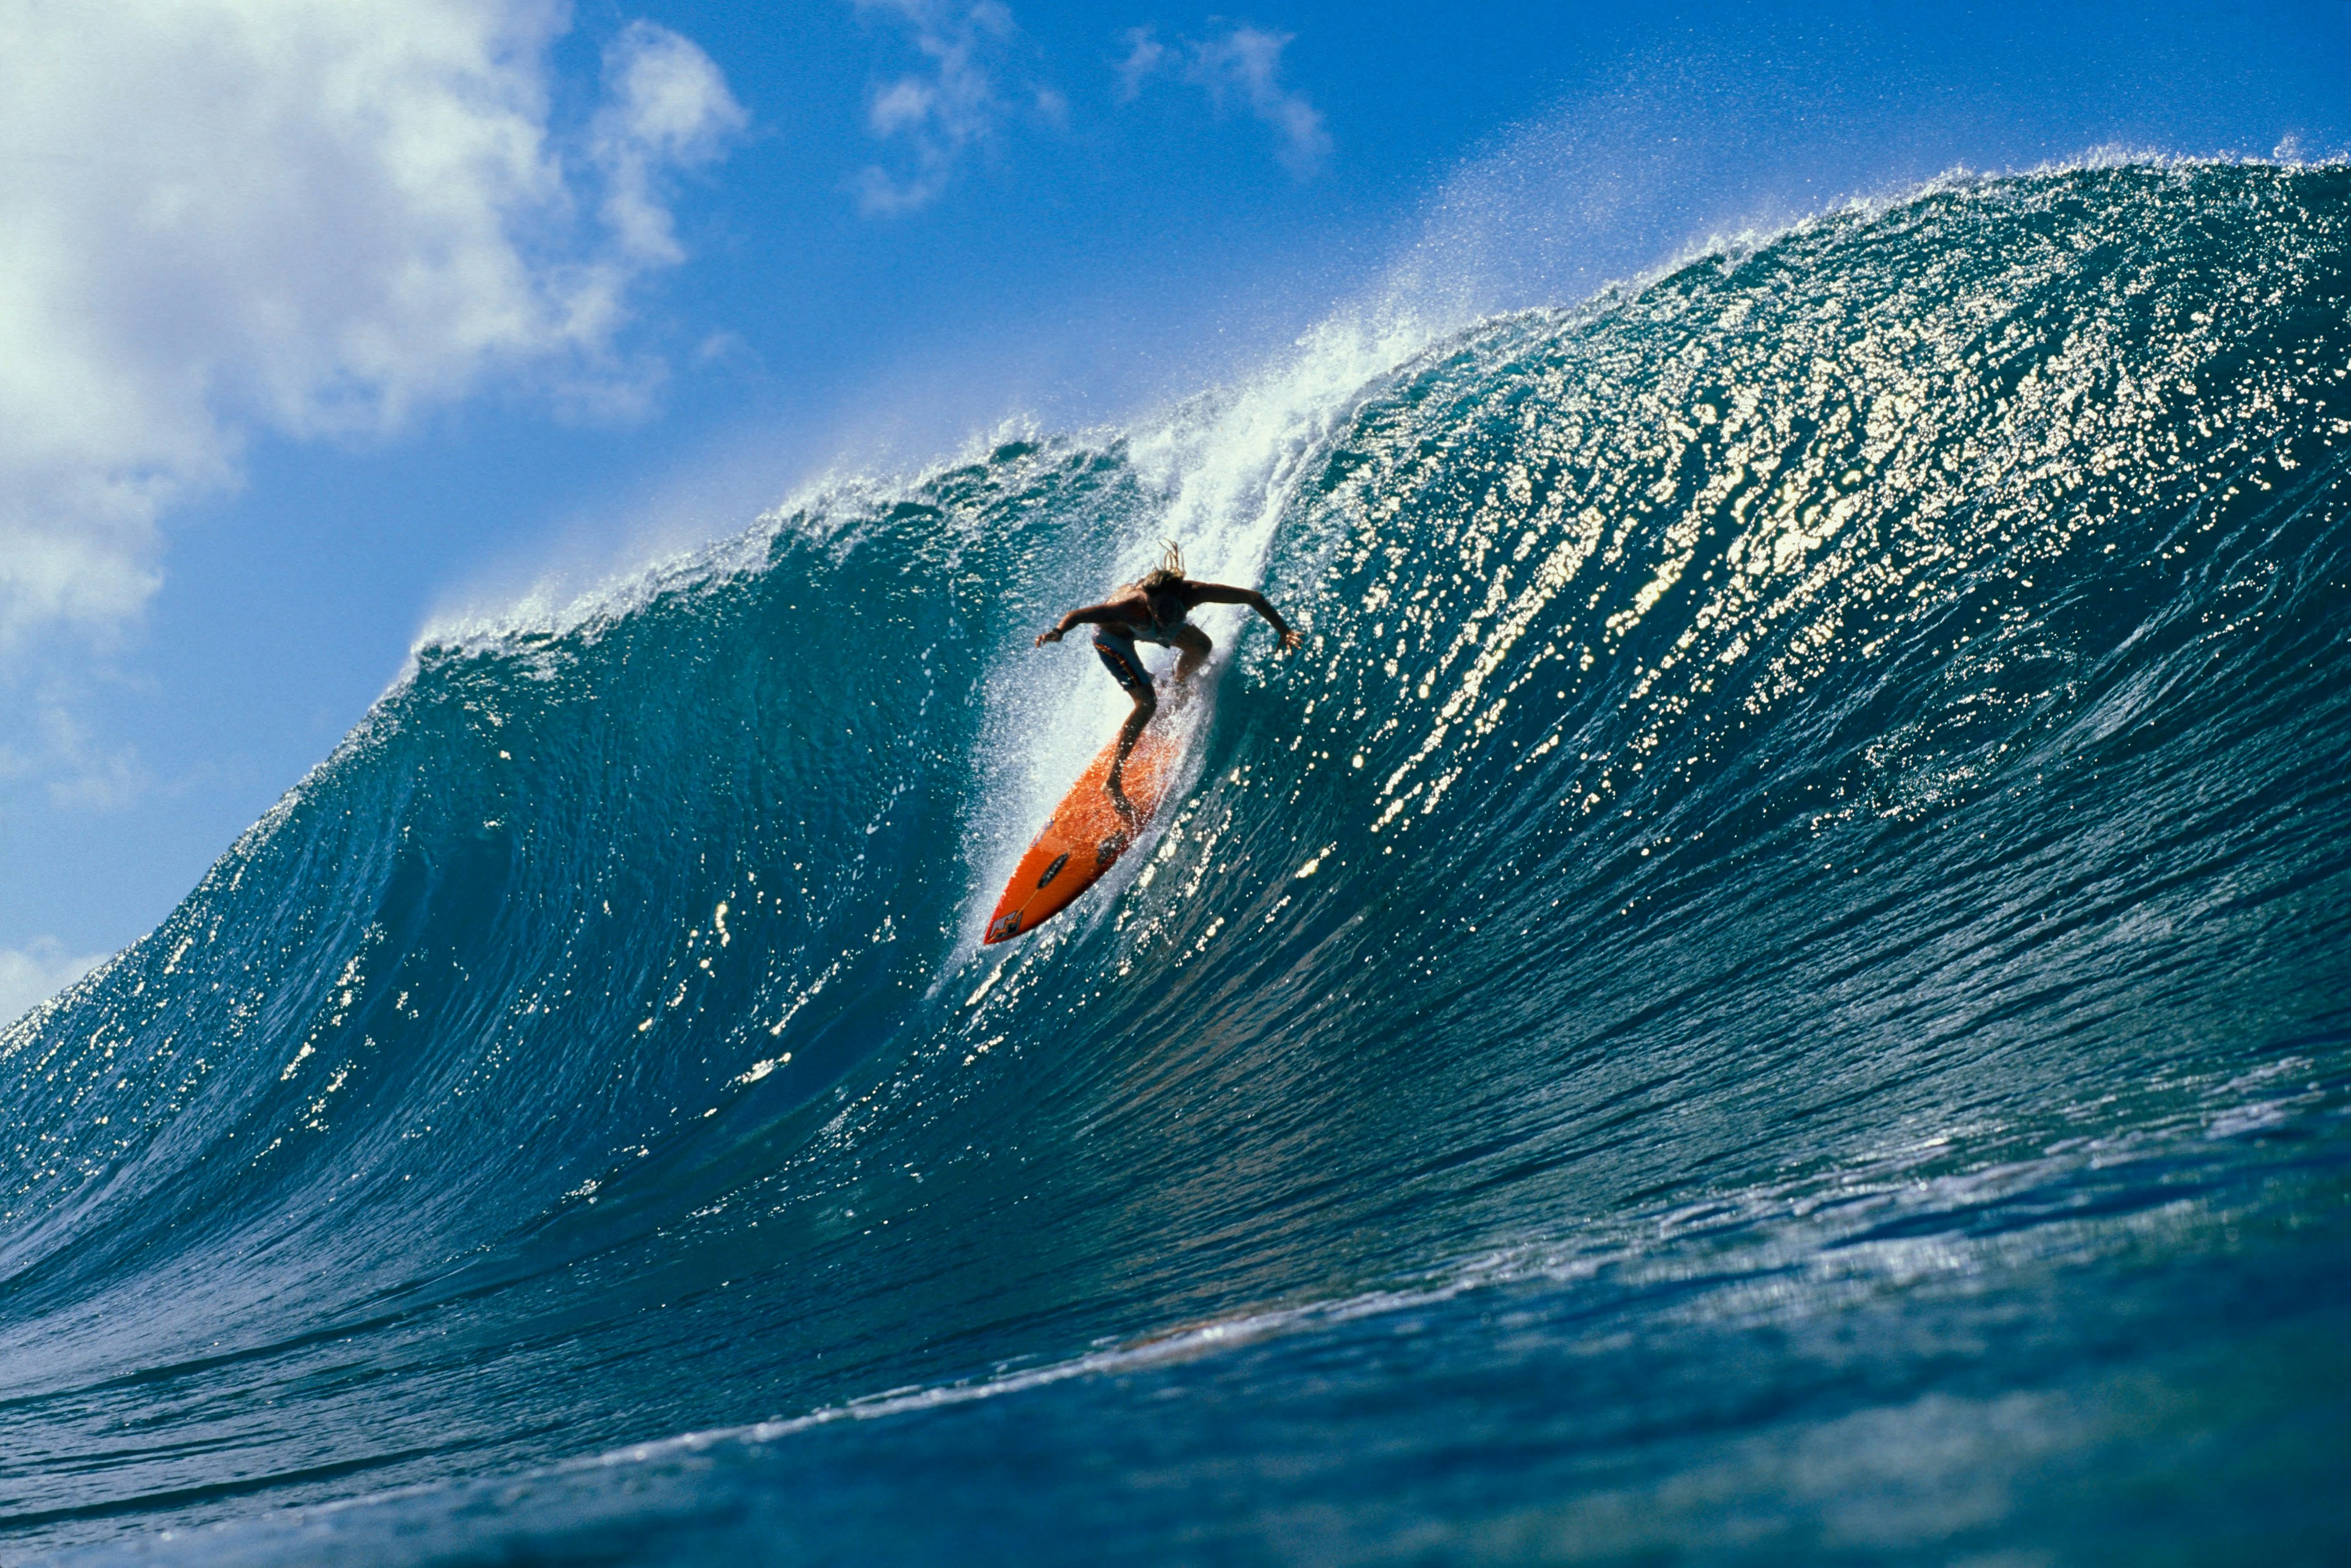 A surfer rides down a very large wave on the North Shore, one of O‘ahu’s highlights.